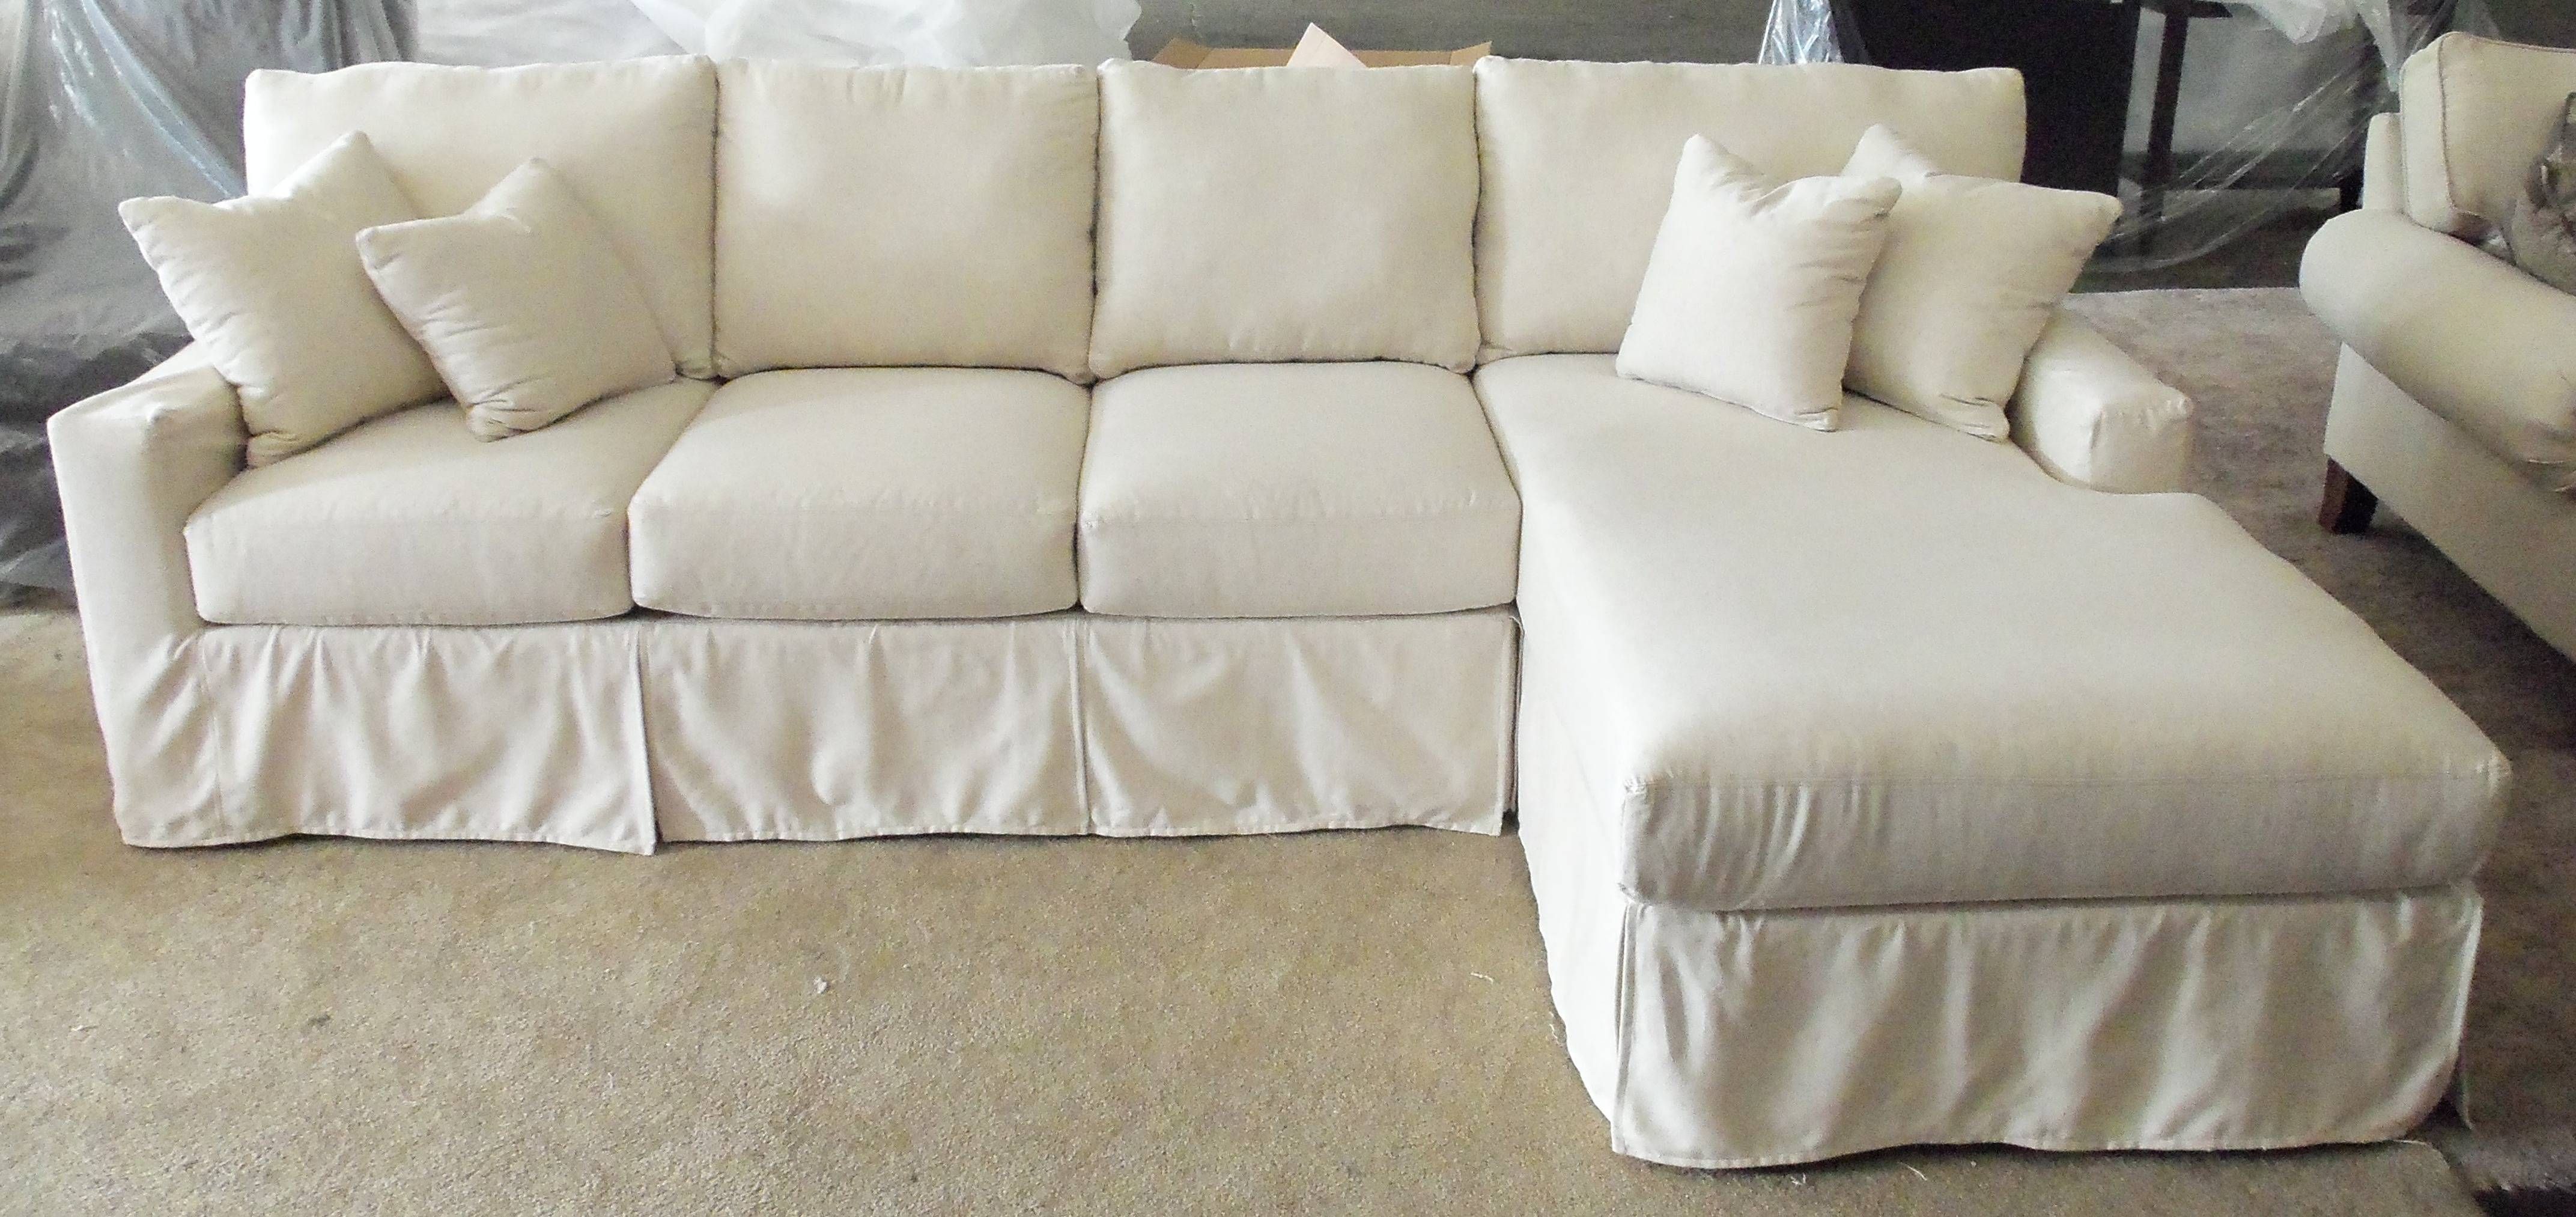 Slipcover For Sectional Sofa With Chaise – Cleanupflorida In Sofas Cover For Sectional Sofas (View 8 of 15)